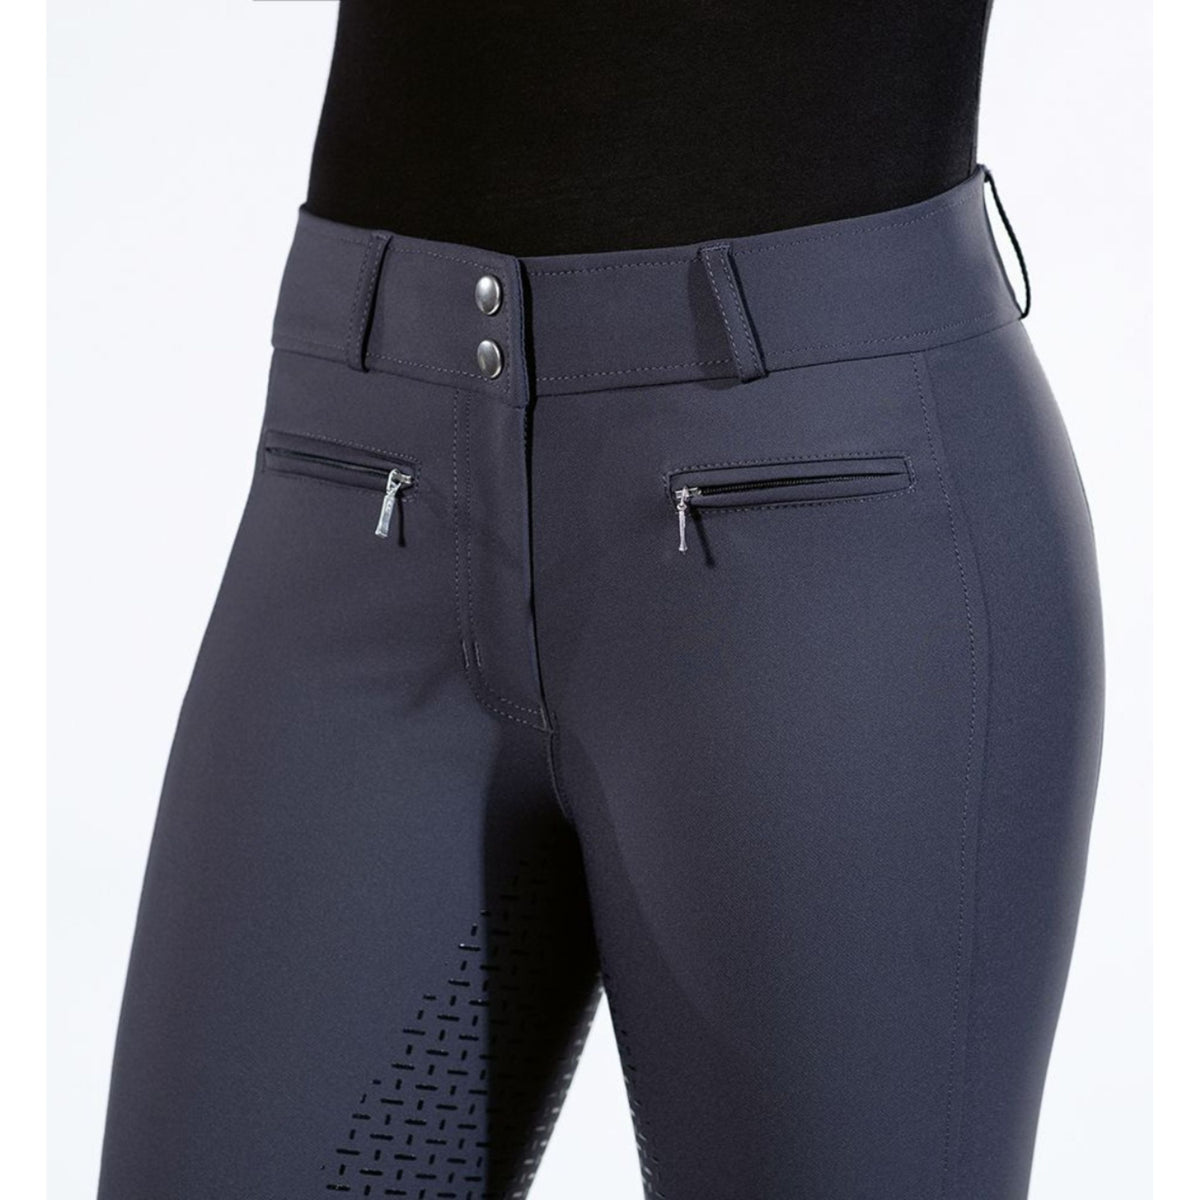 Front details of navy breeches with double buttons and zip pockets.